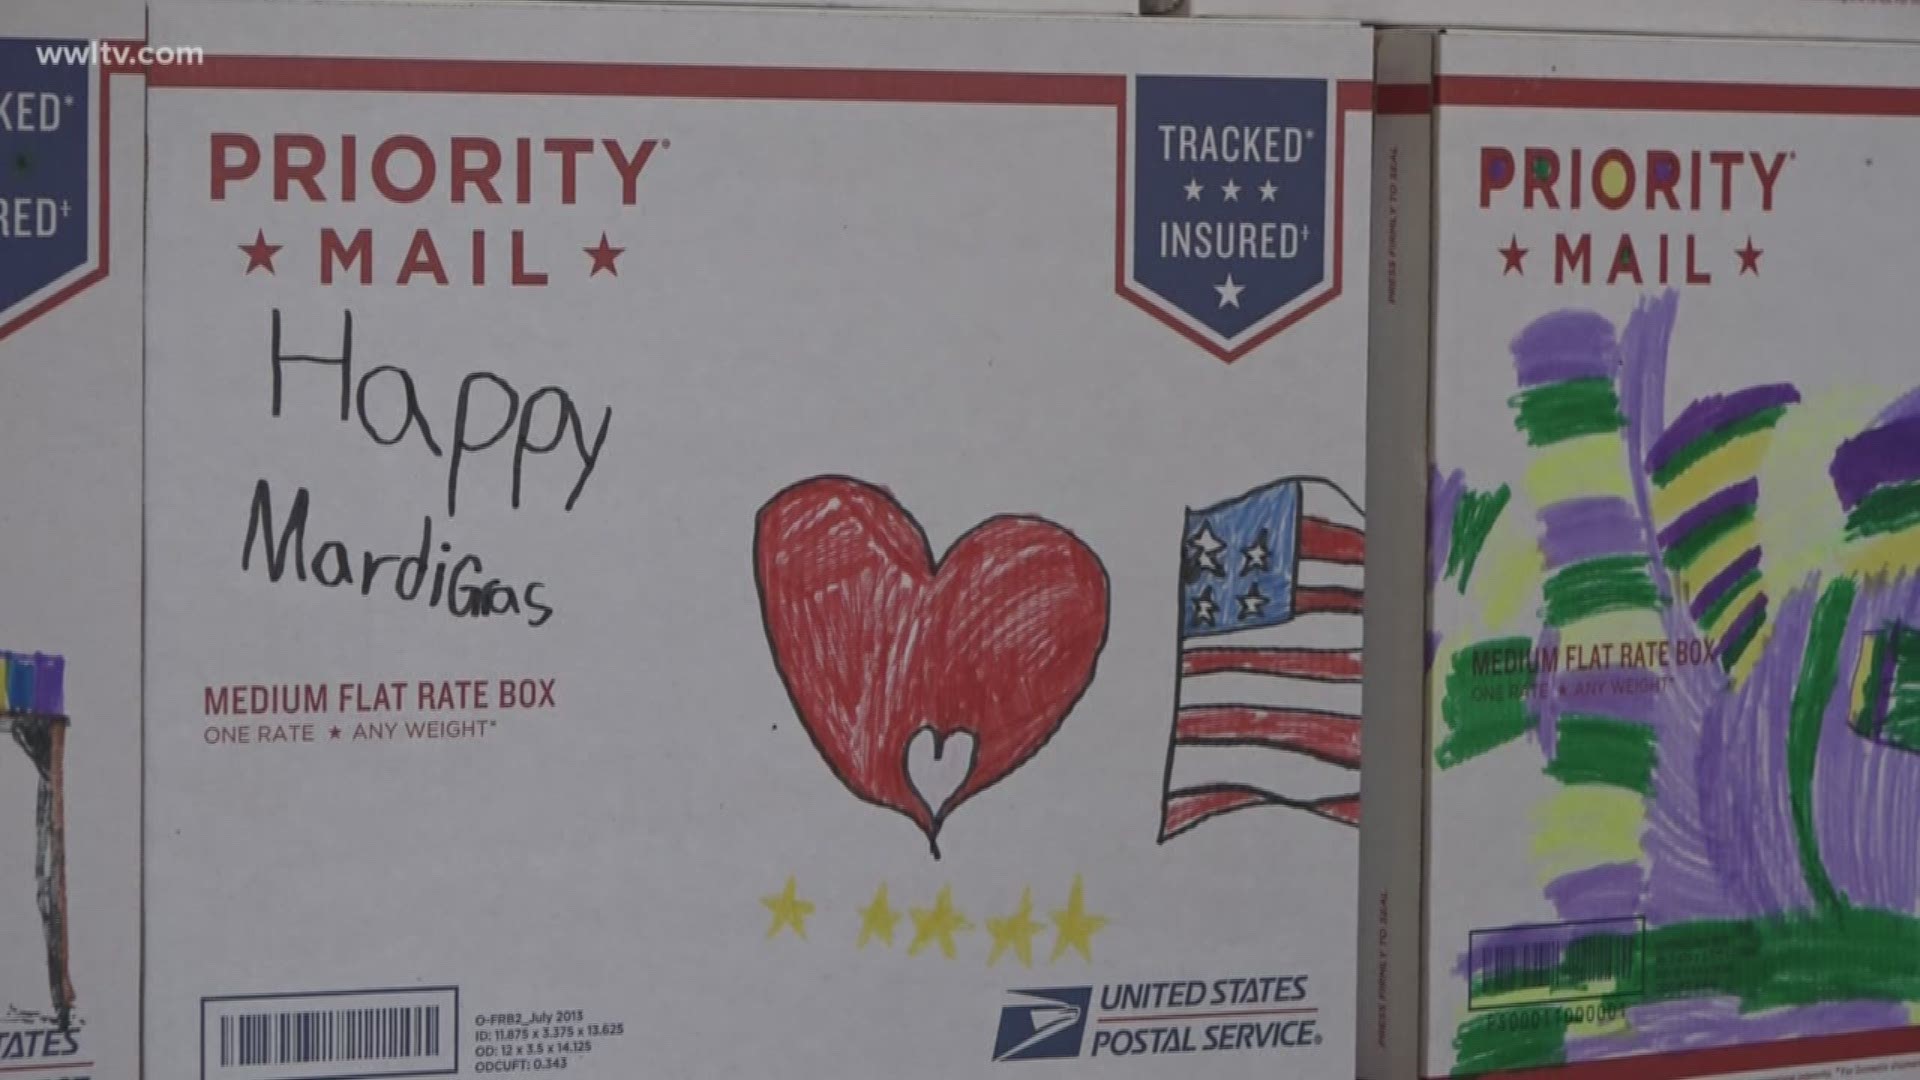 US Troops defending out country overseas will get a slice of home in the mail thanks to some local volunteers.